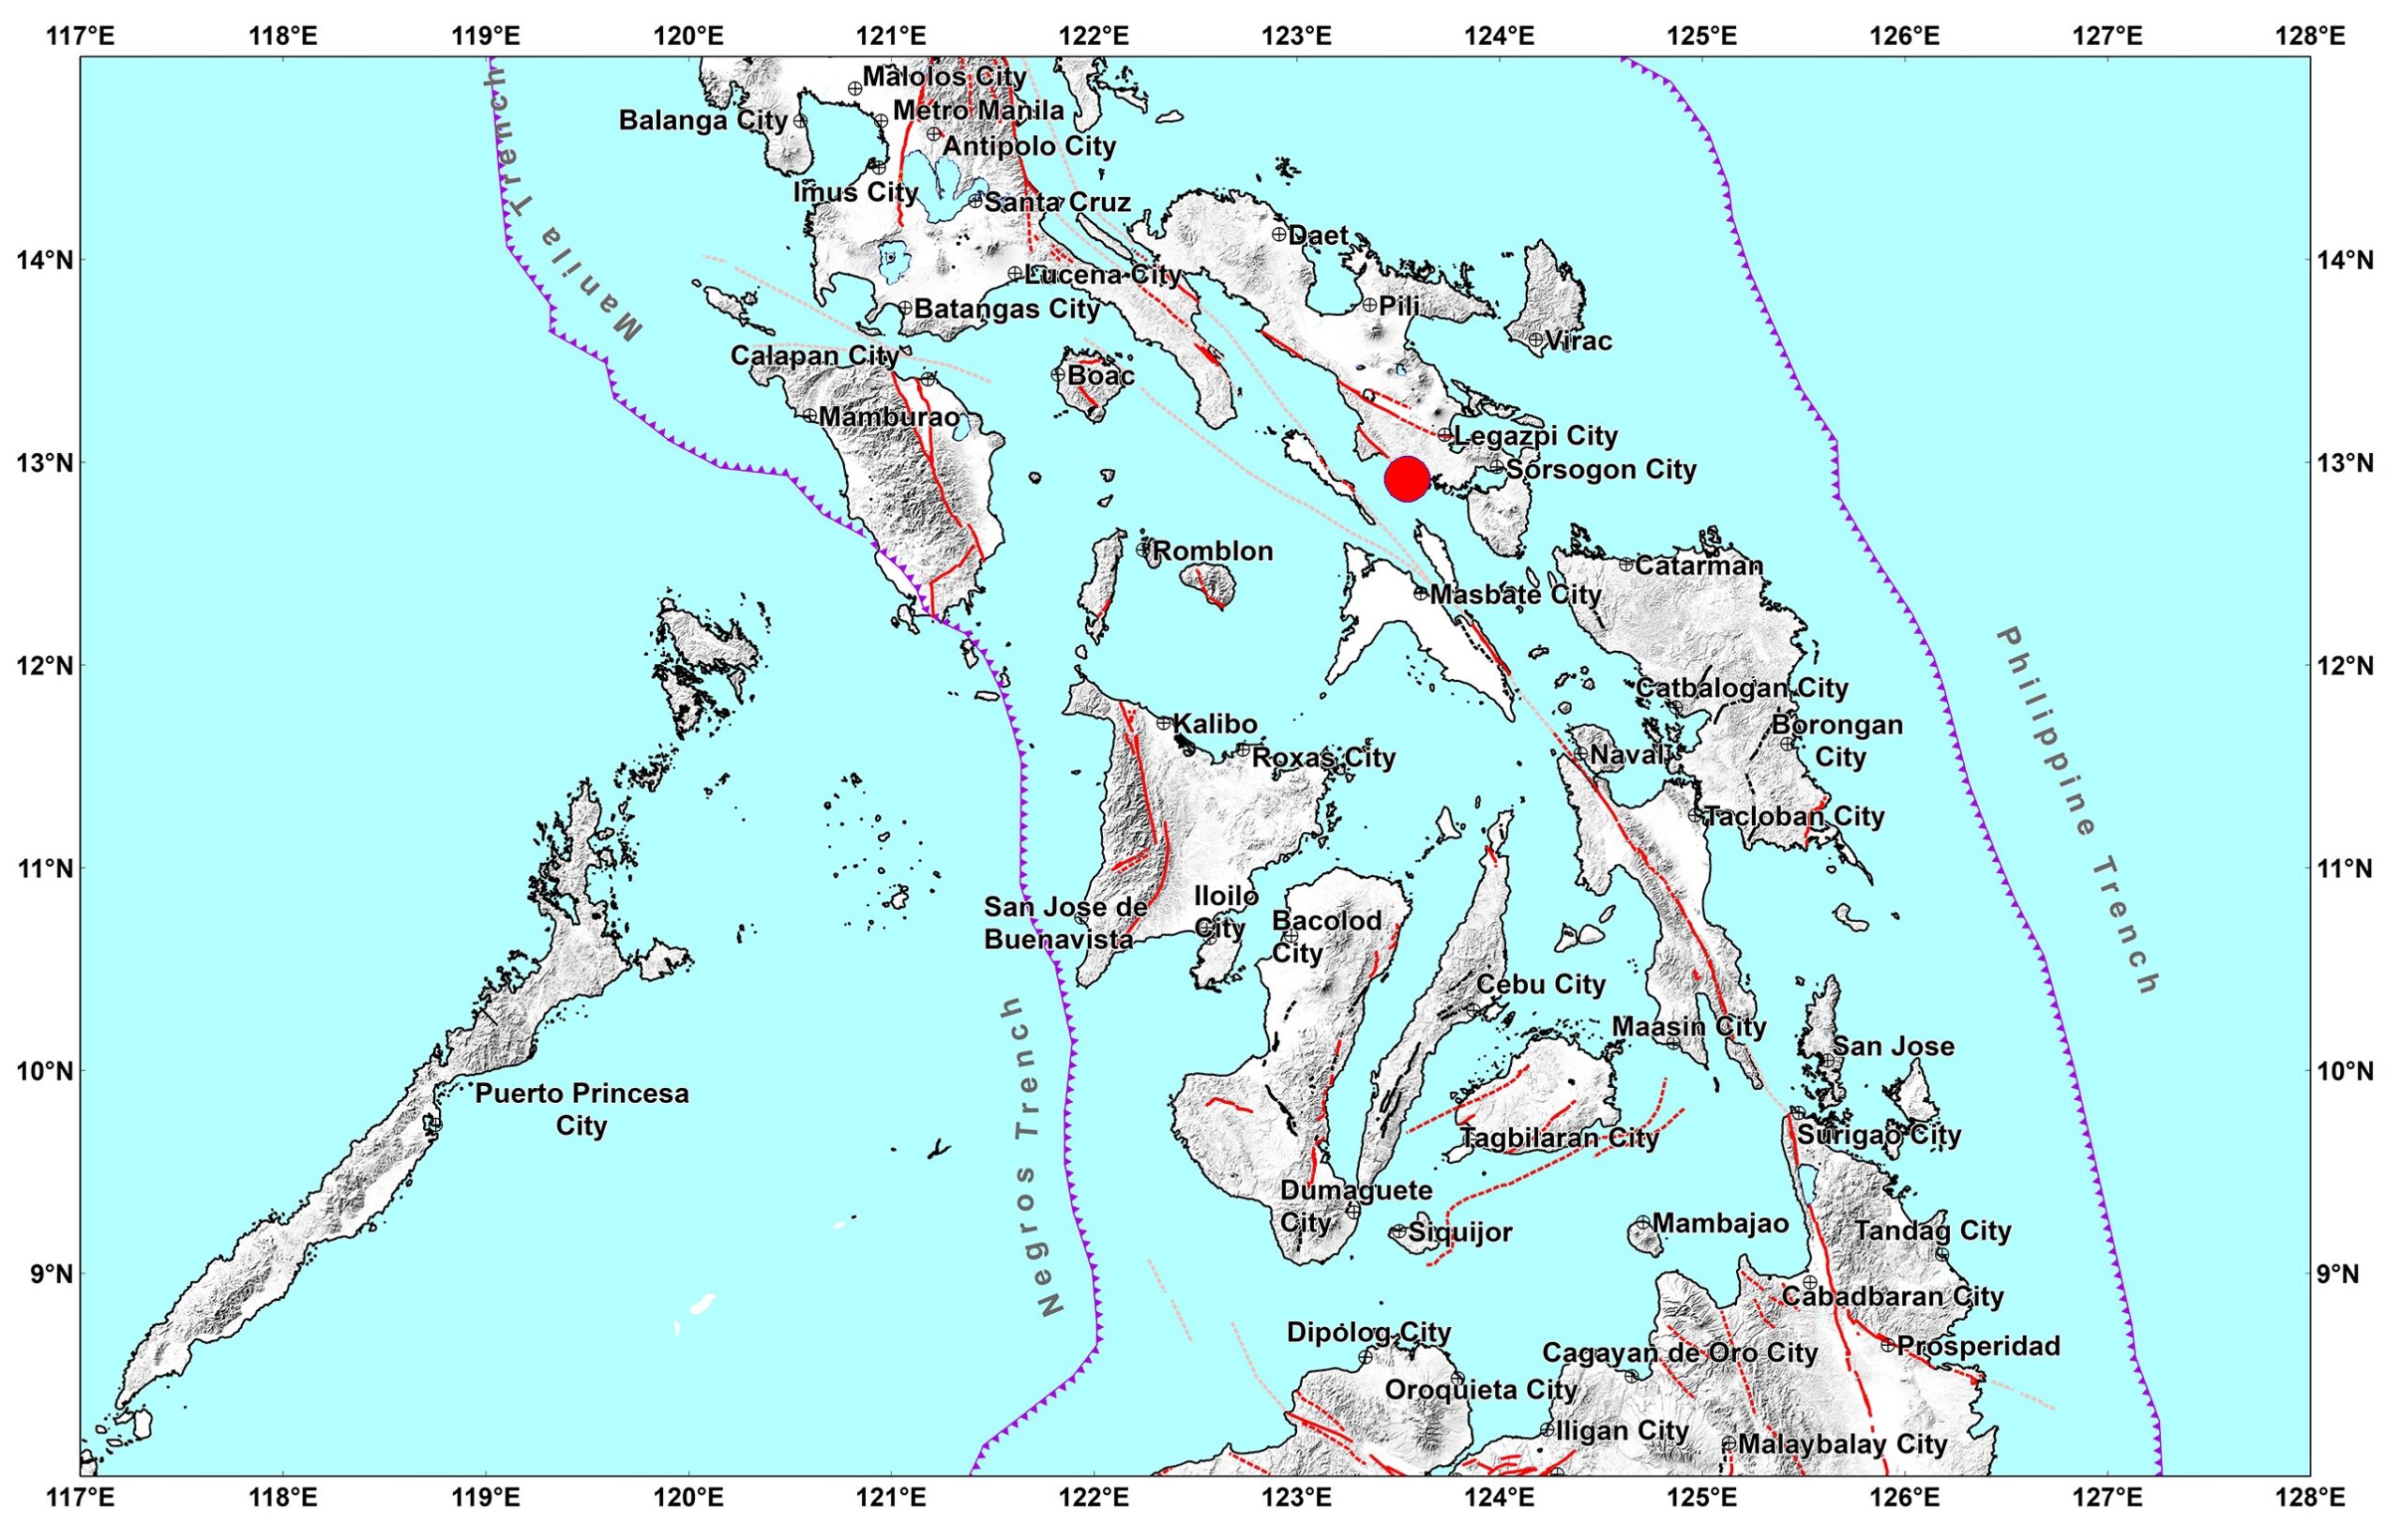 A magnitude 4.4 earthquake struck Donsol, Sorsogon on Saturday night, May 25, the Philippine Institute of Volcanology and Seismology (Phivolcs) said.